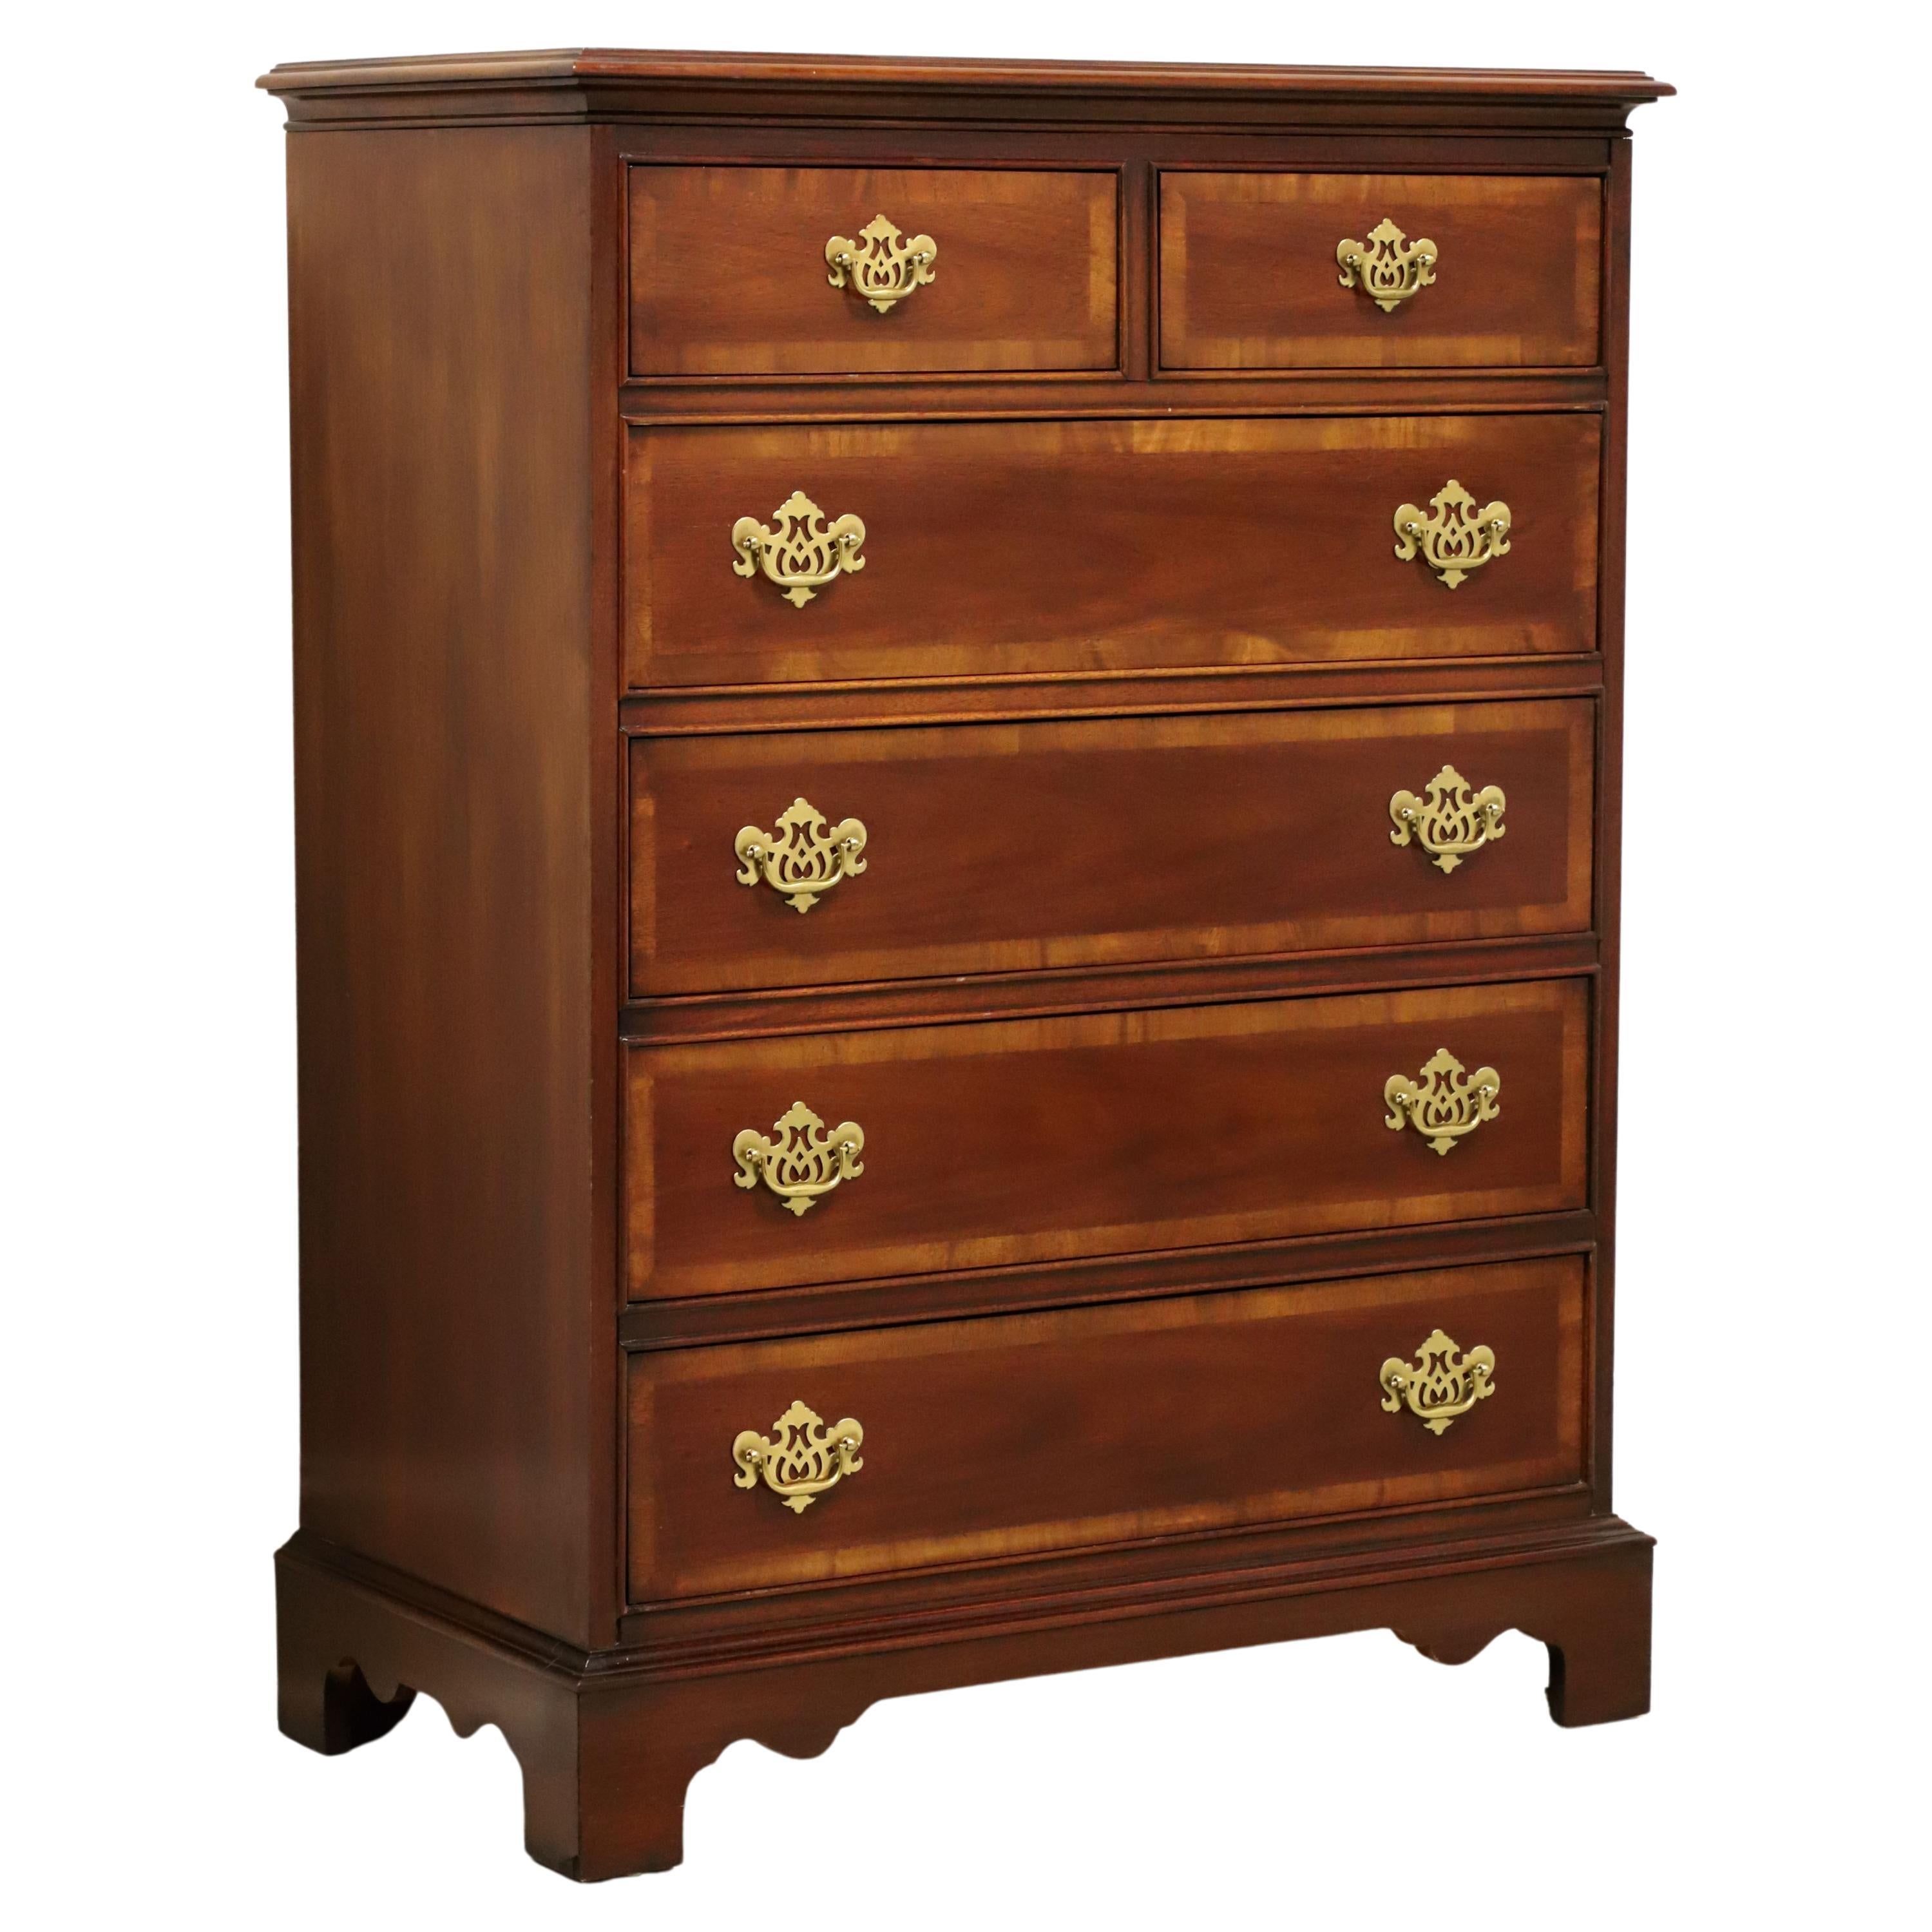 DIXIE Banded Mahogany Chippendale Chest of Six Drawers - A